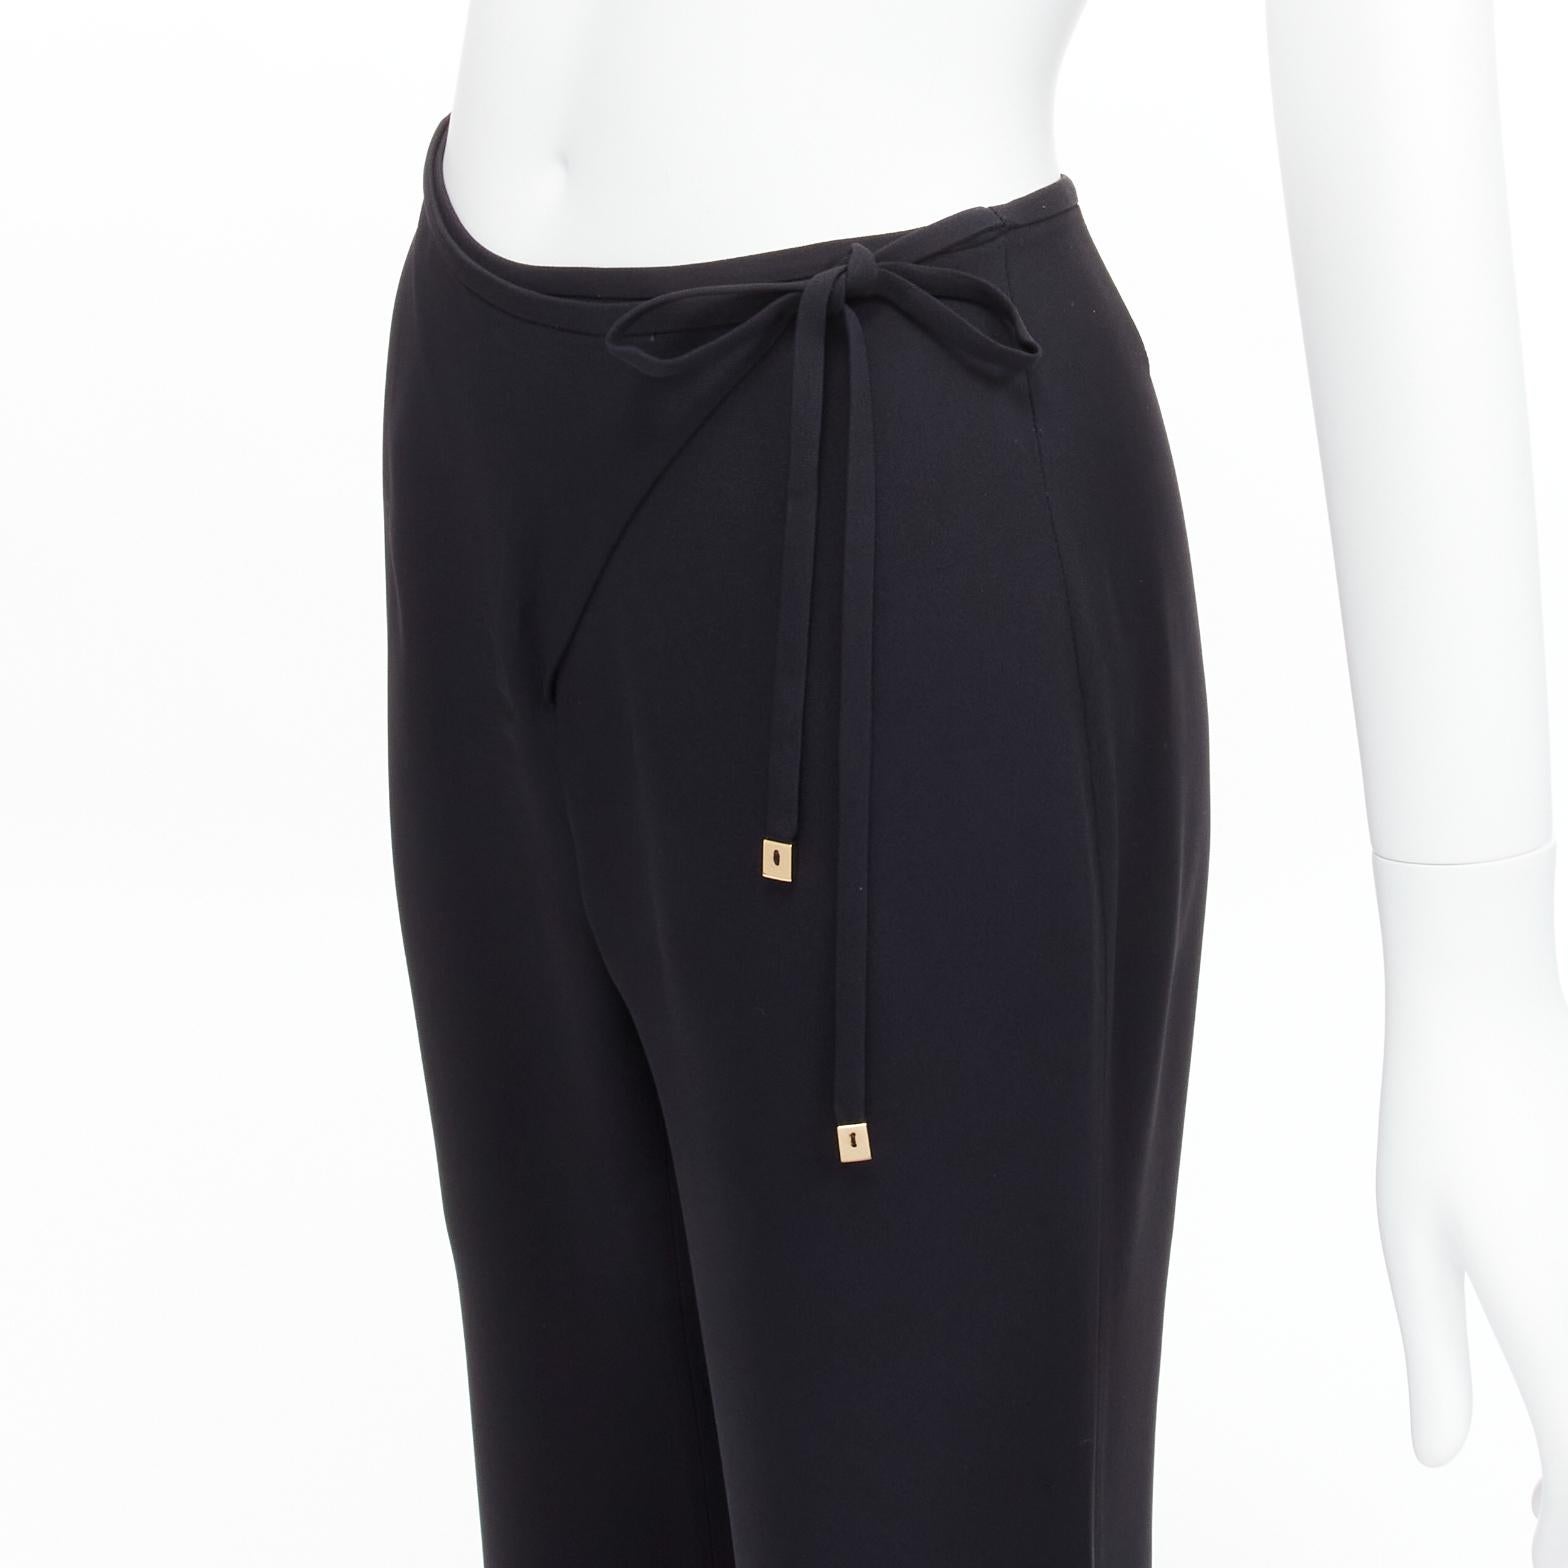 GUCCI Tom Ford Vintage black minimalistic metal charm tie waist wide leg pants IT40 S
Reference: TGAS/D00389
Brand: Gucci
Designer: Tom Ford
Material: Rayon, Acetate
Color: Black, Gold
Pattern: Solid
Closure: Wrap Tie
Lining: Black
Extra Details: